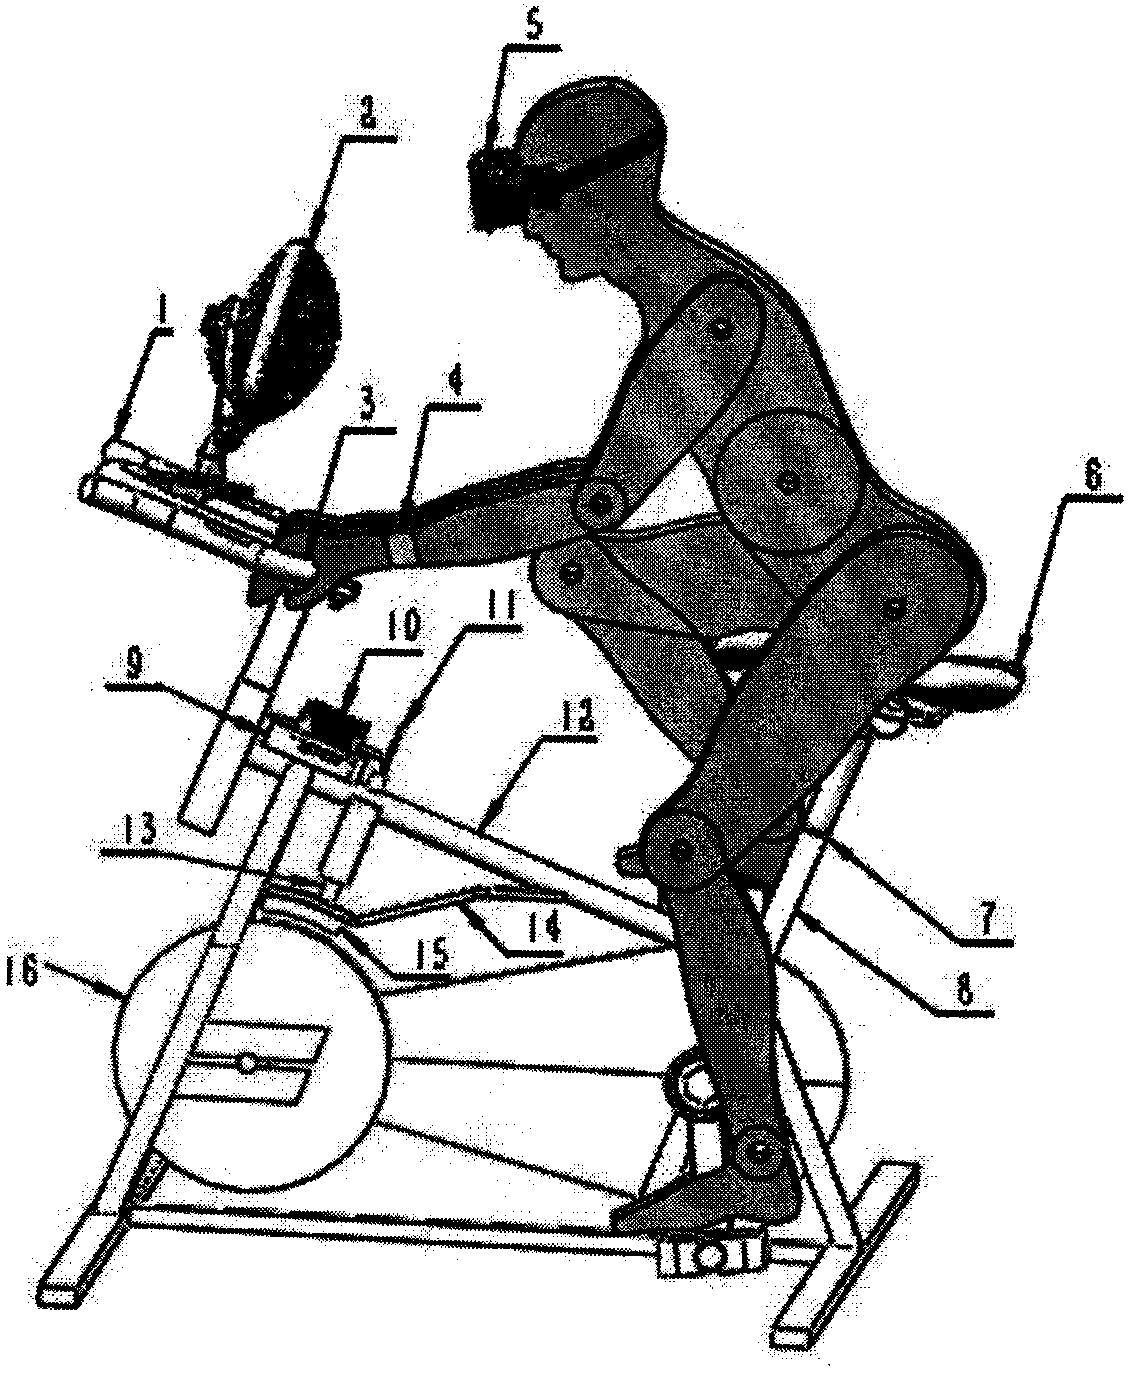 Bodybuilding bicycle system based on virtual reality technology